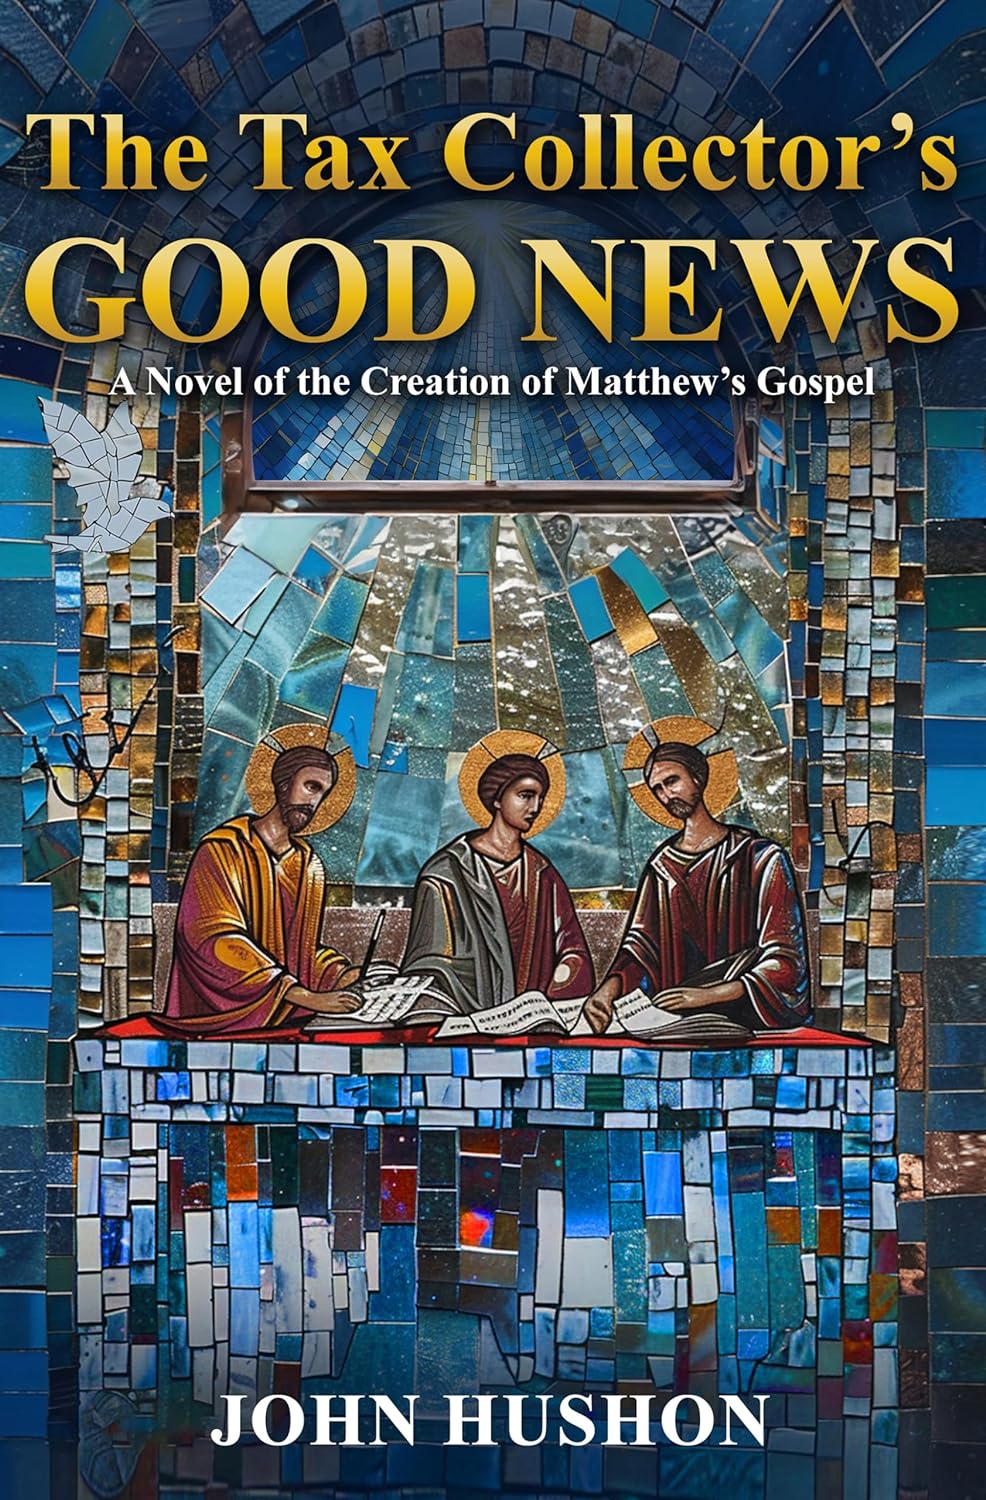 John Hushon Releases New Religious Historical Fiction Novel - The Tax Collector’s Good News